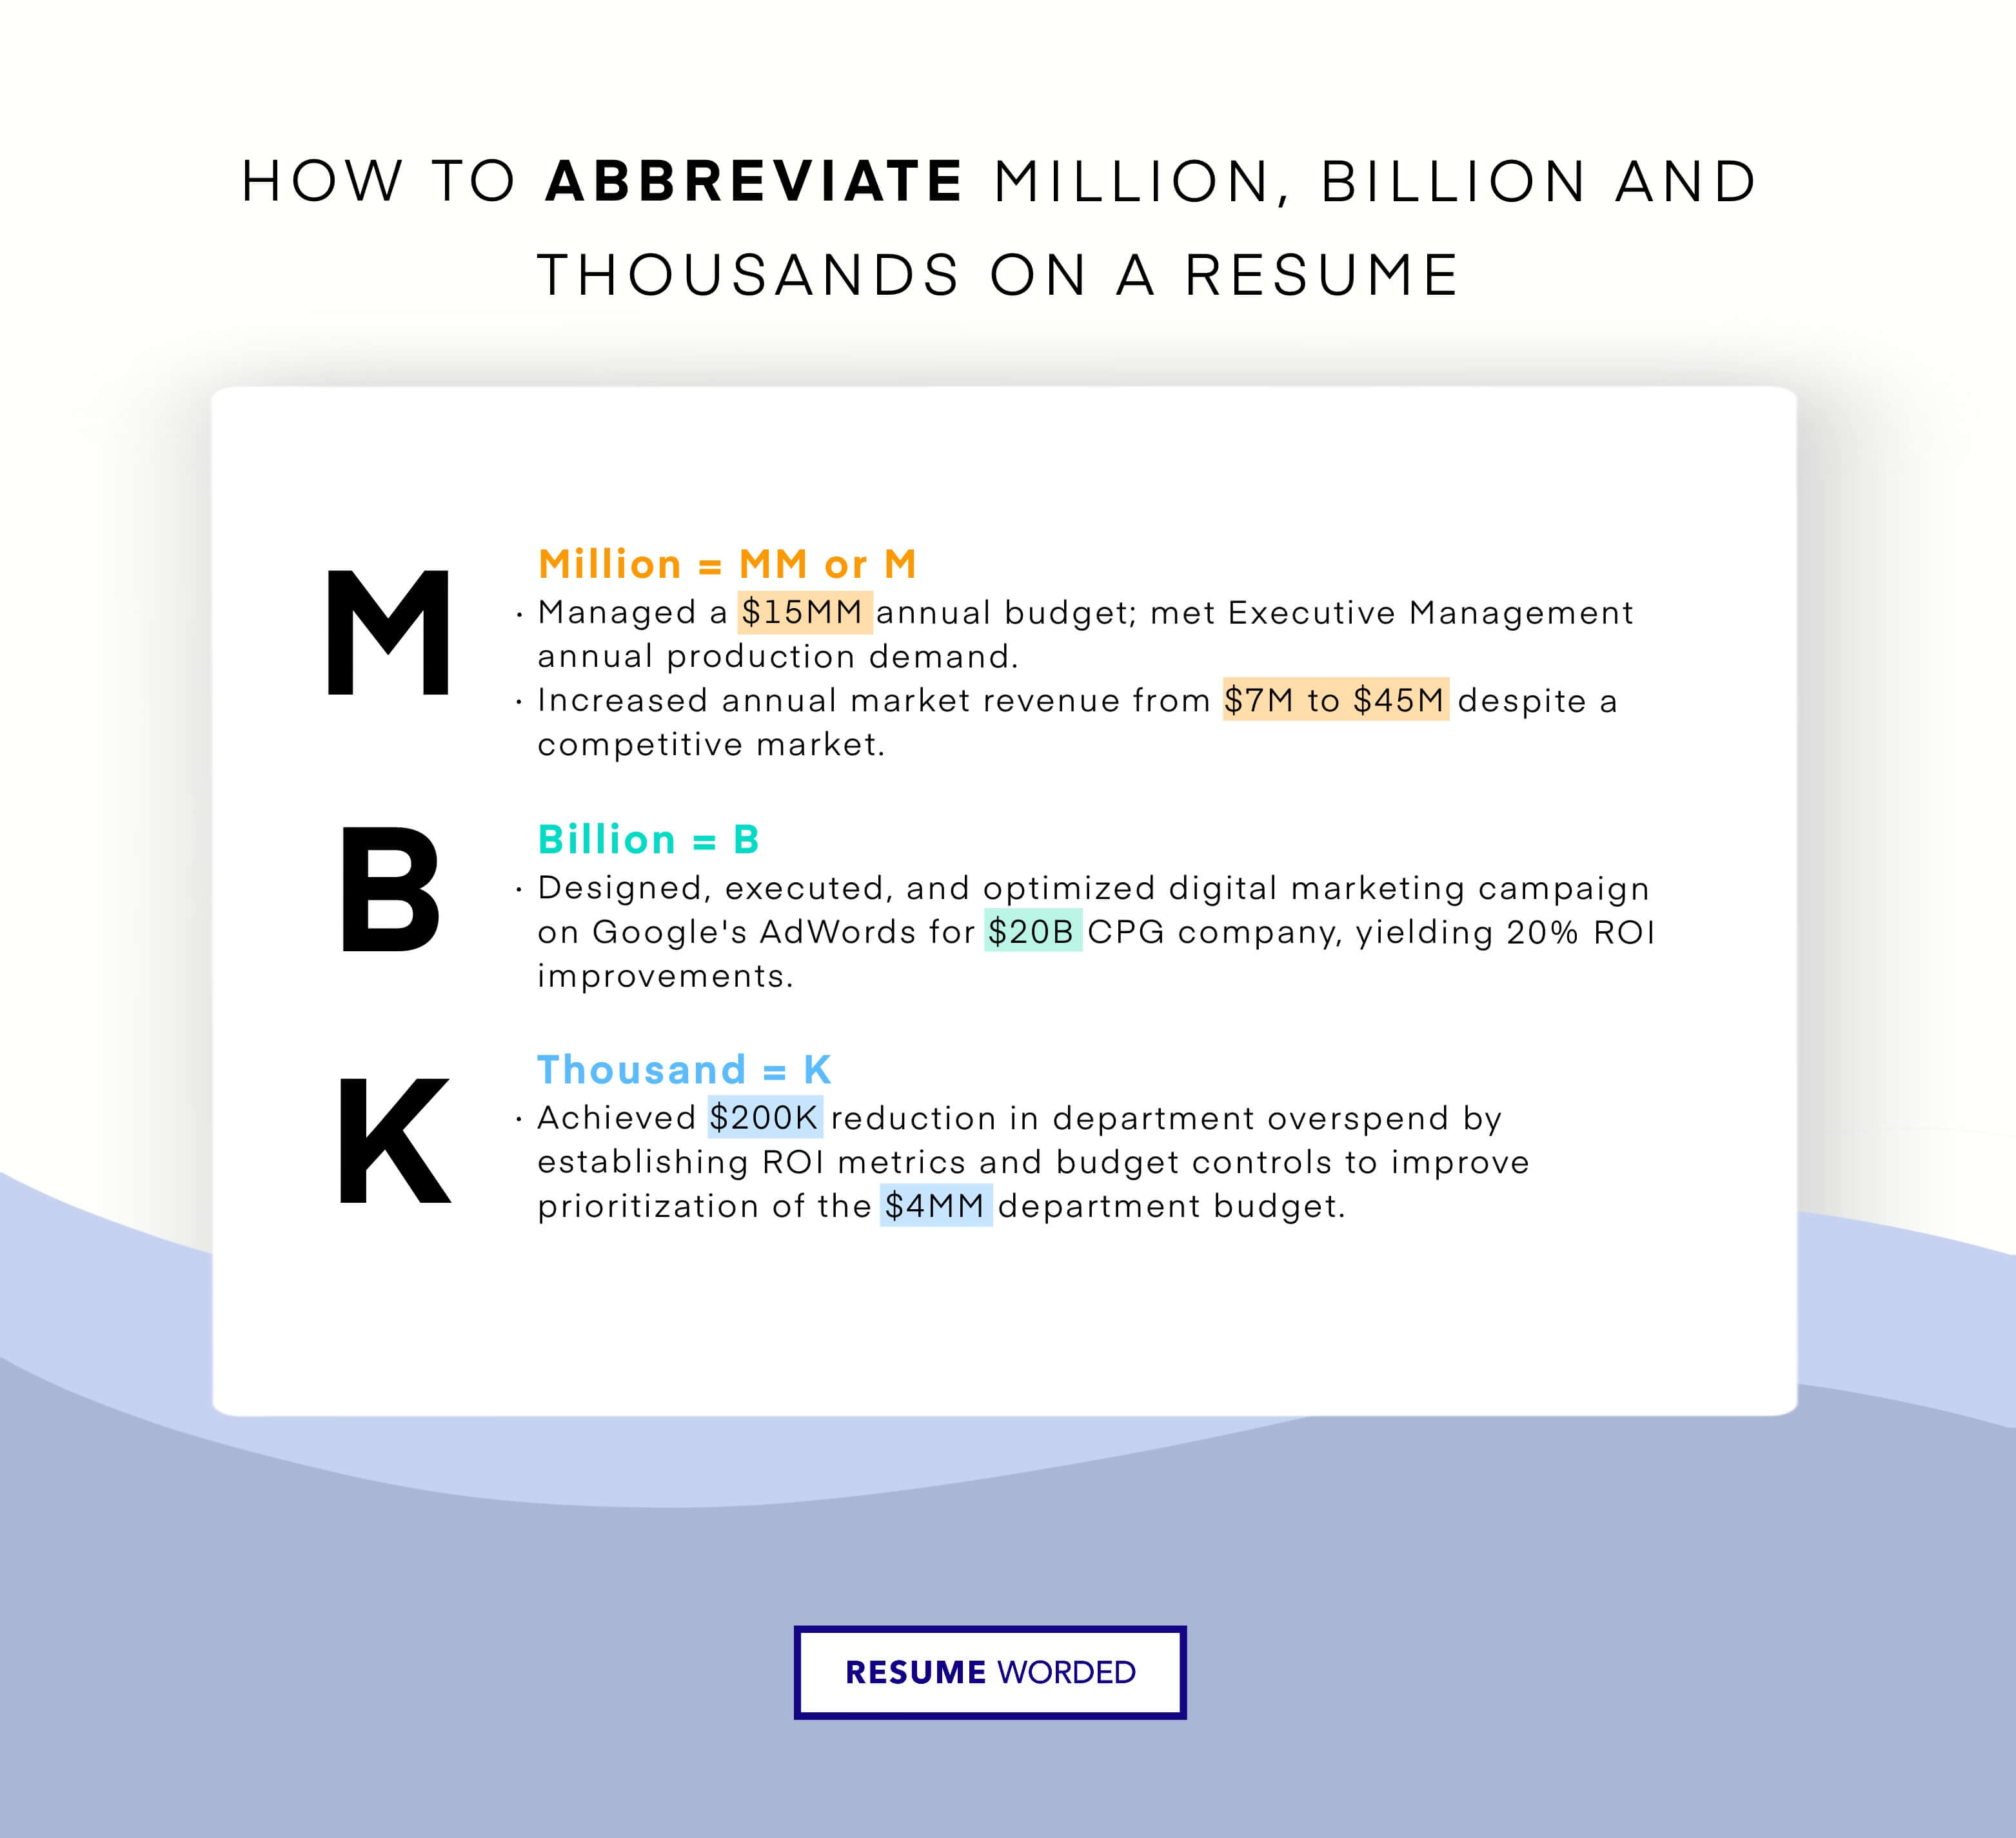 How to abbreviate numbers on a resume